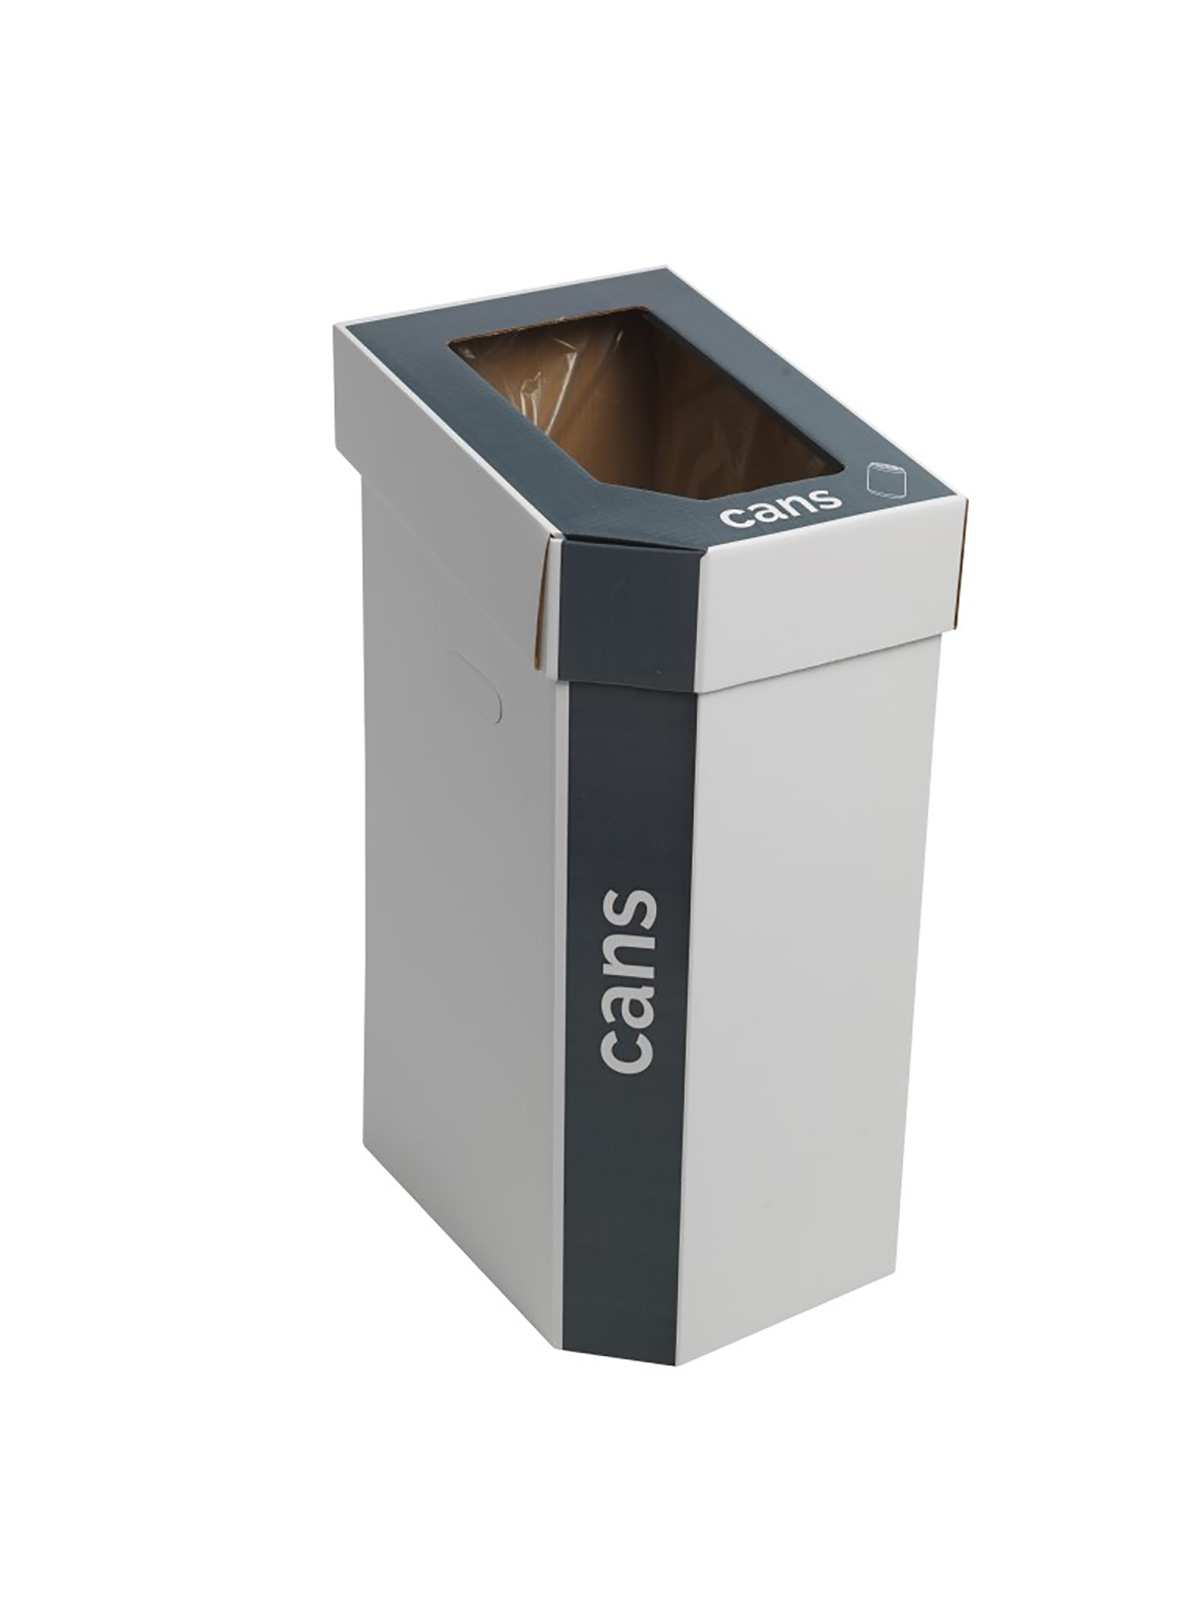 cardboard-recycling-bins-set-of-5-supplied-with-clear-plastic-liners